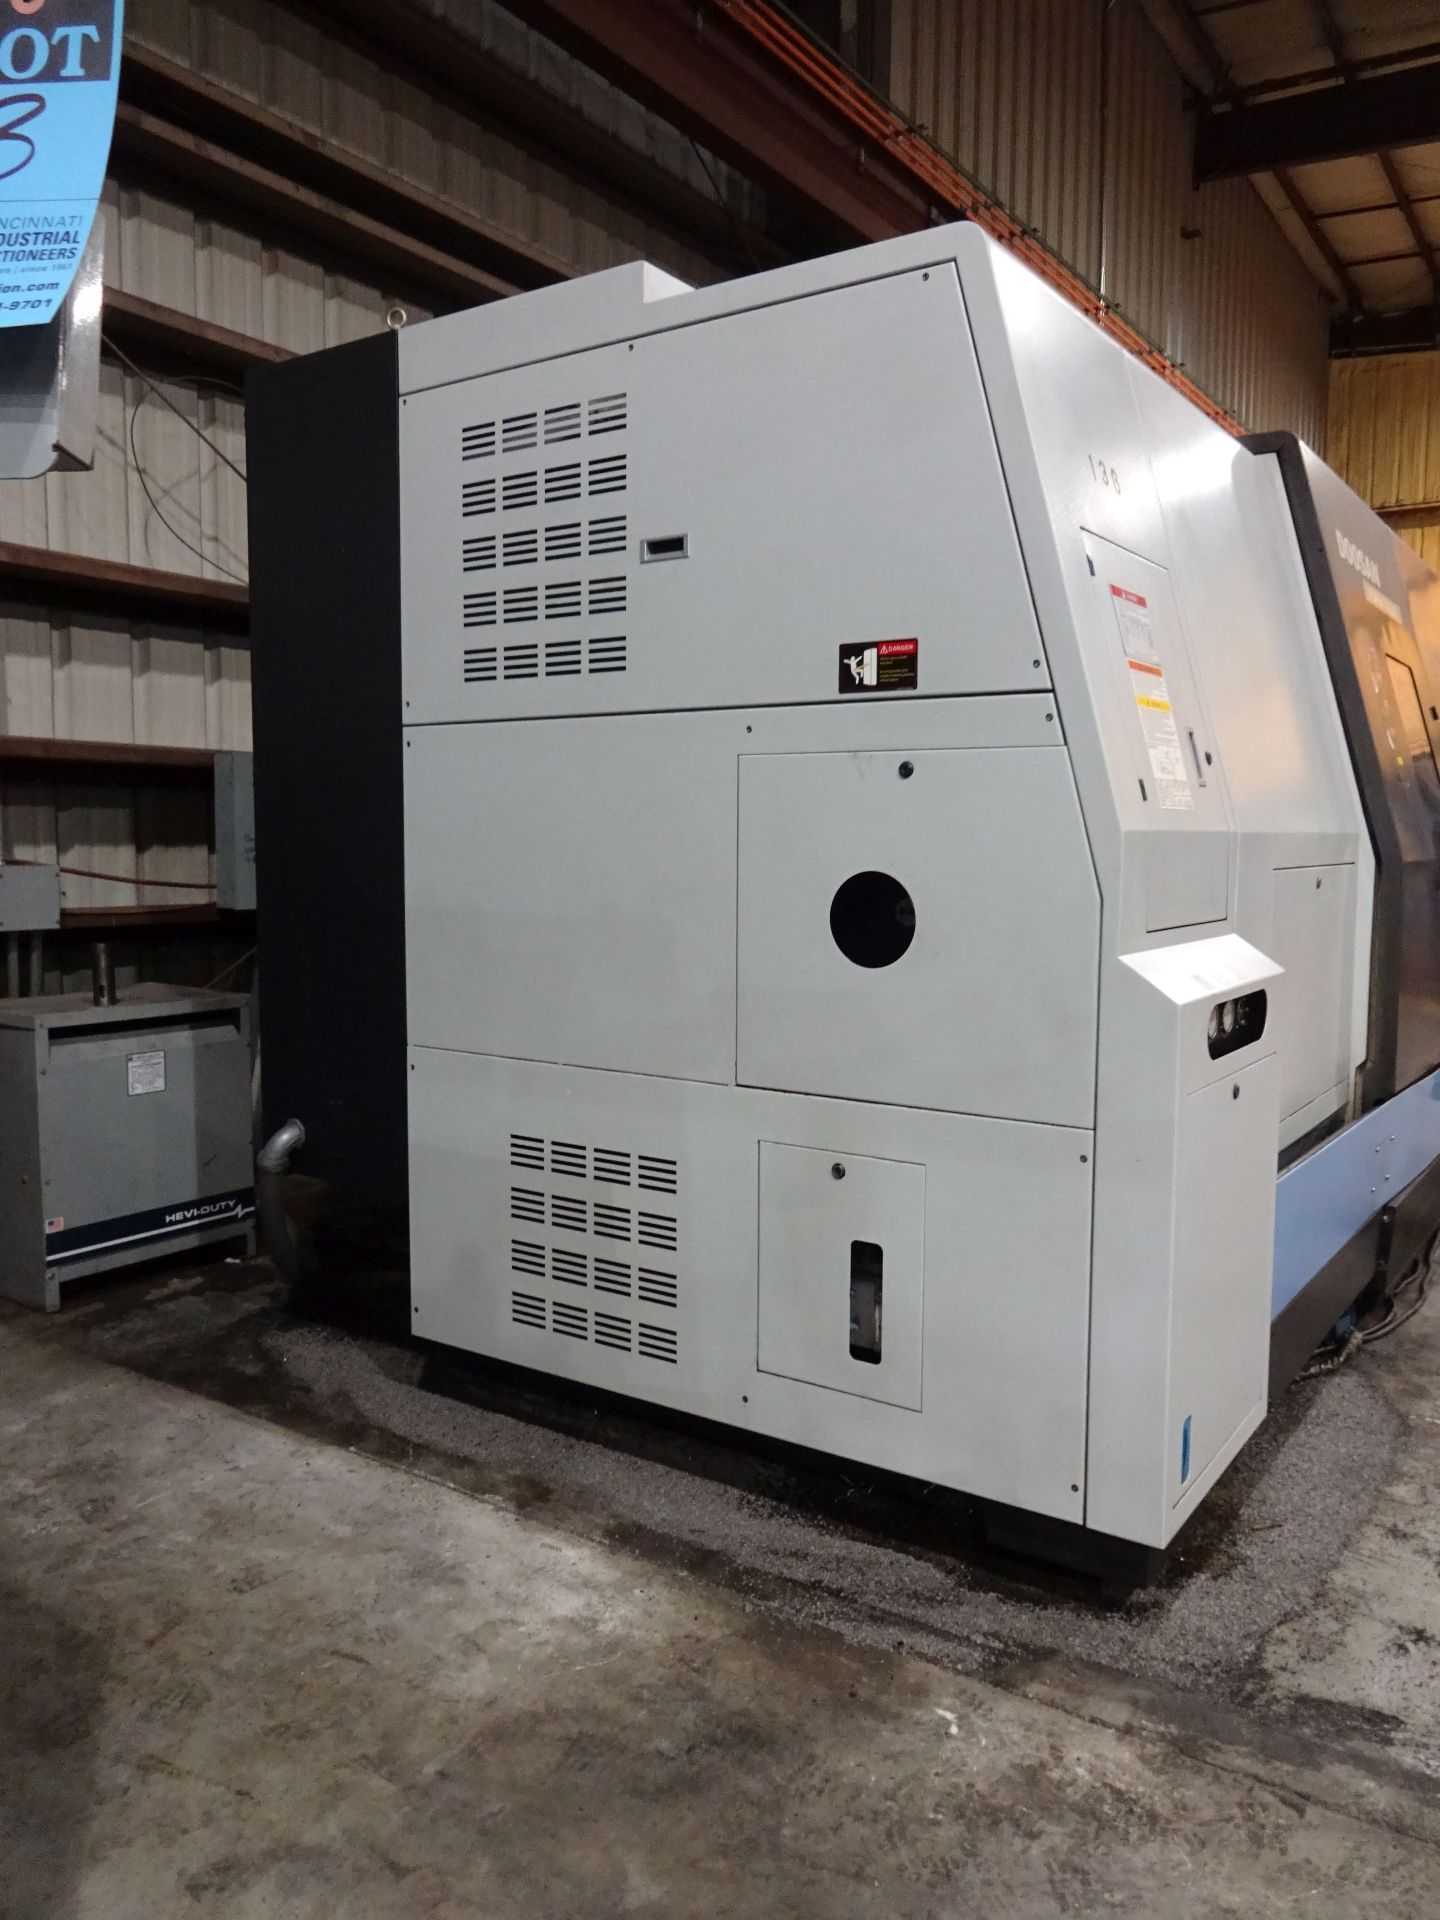 2007 DOOSAN MODEL PUMA 700LM LARGE CAPACITY CNC TURNING CENTER WITH LINE MILLING; S/N 60LM0700, - Image 6 of 27